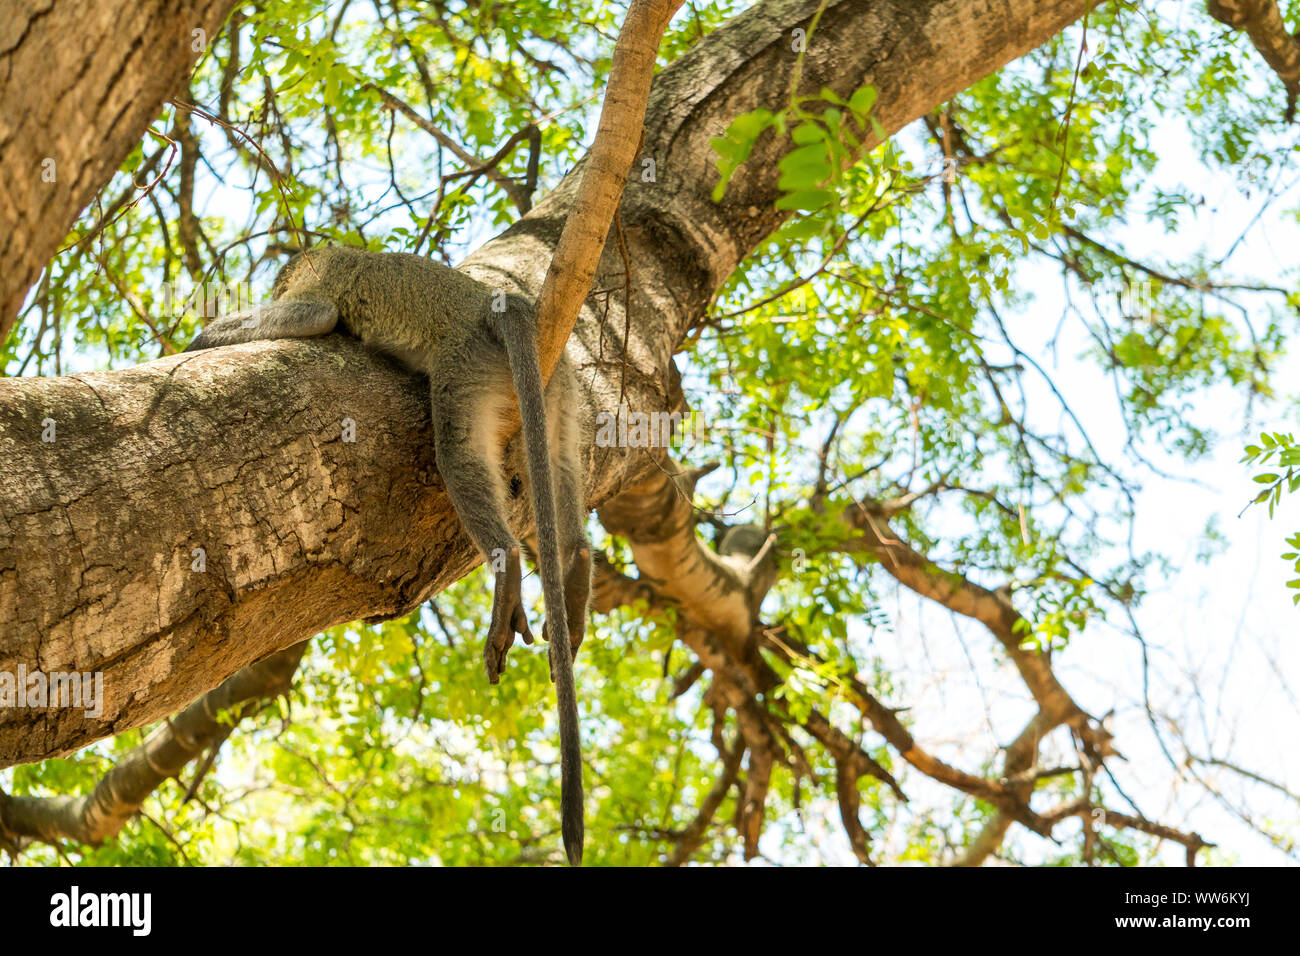 monkey relaxing on a tree in south africa Stock Photo